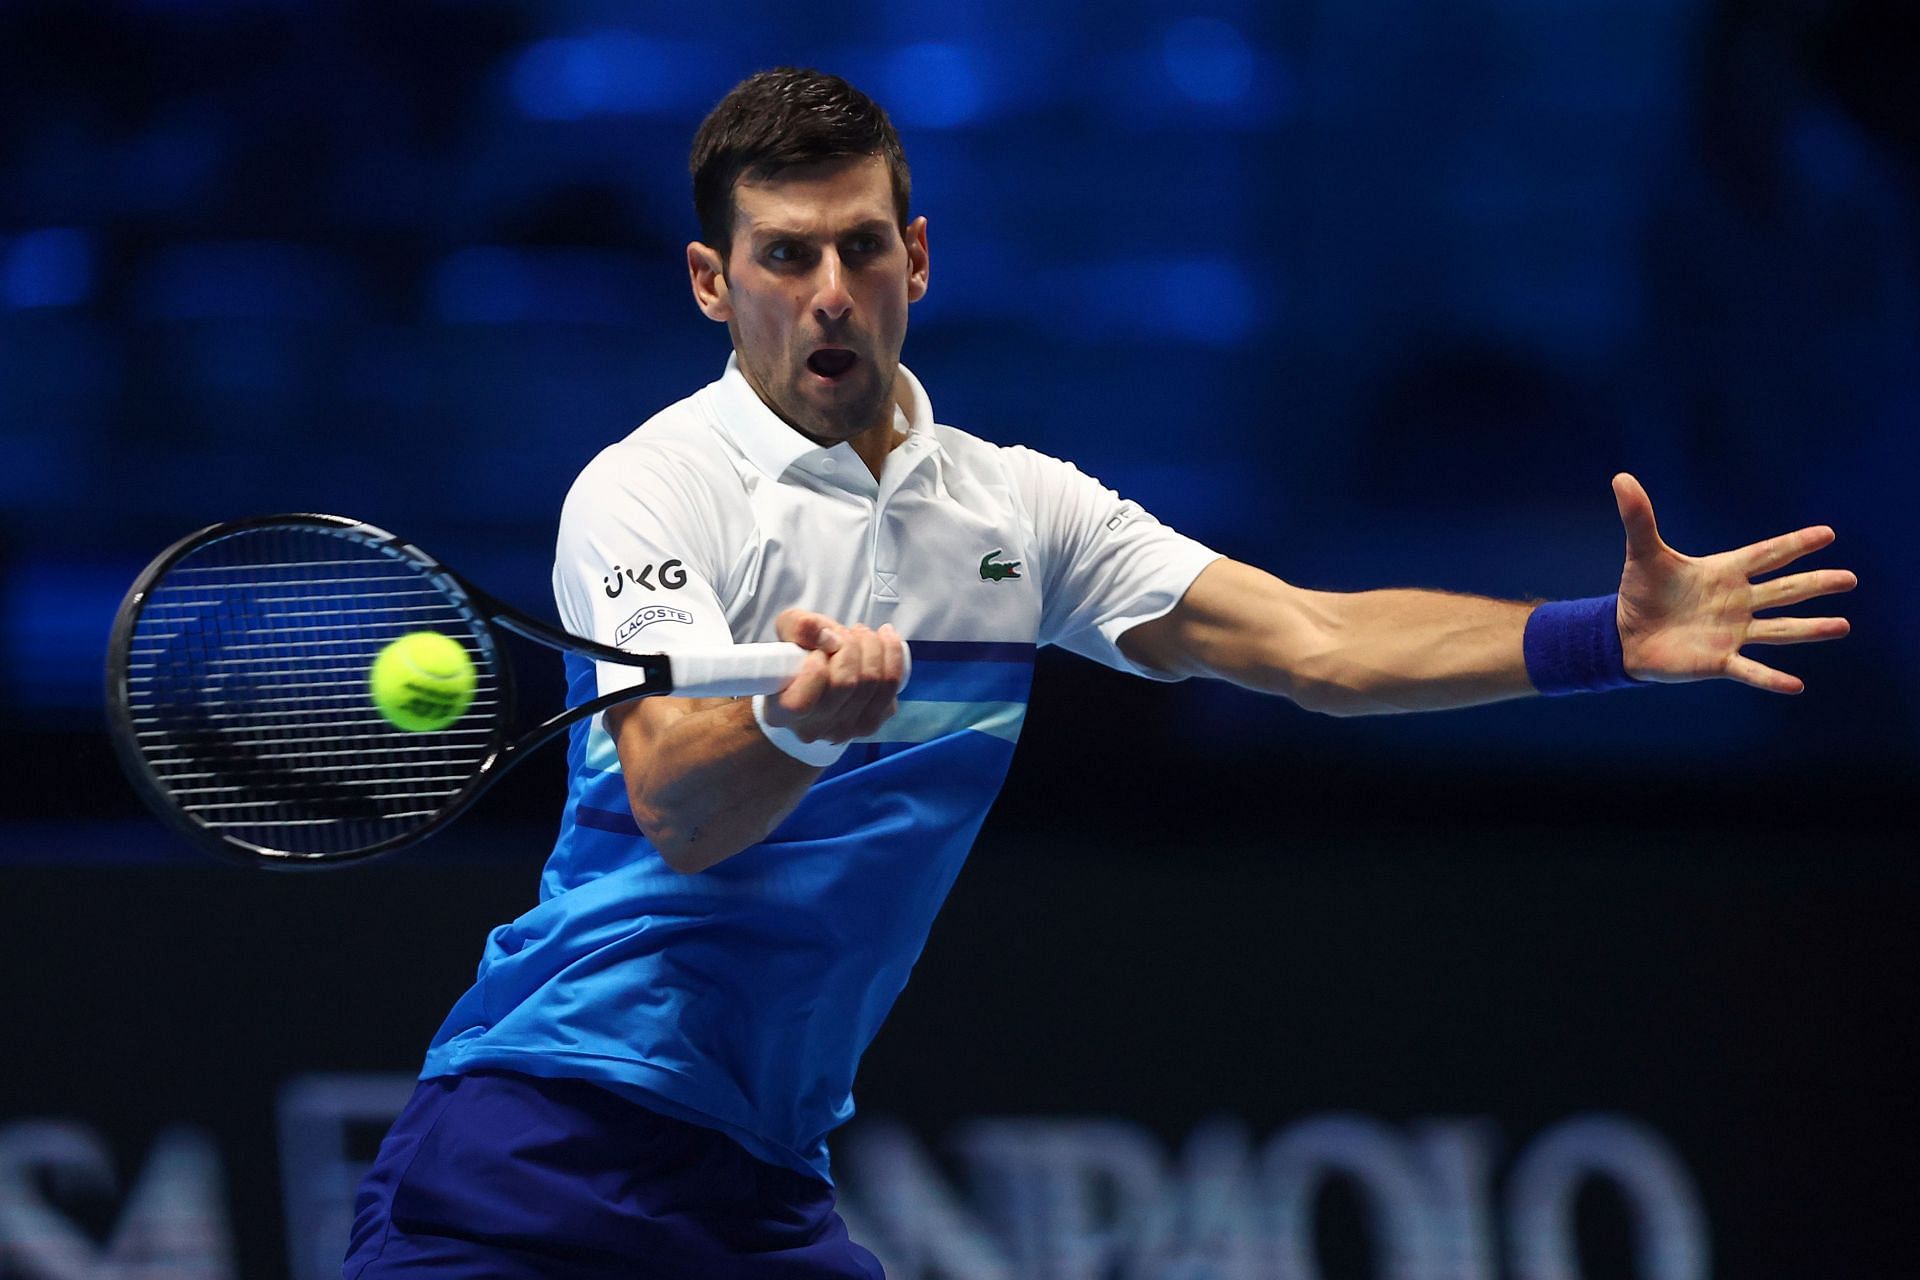 Novak Djokovic in action at the Nitto ATP World Tour Finals